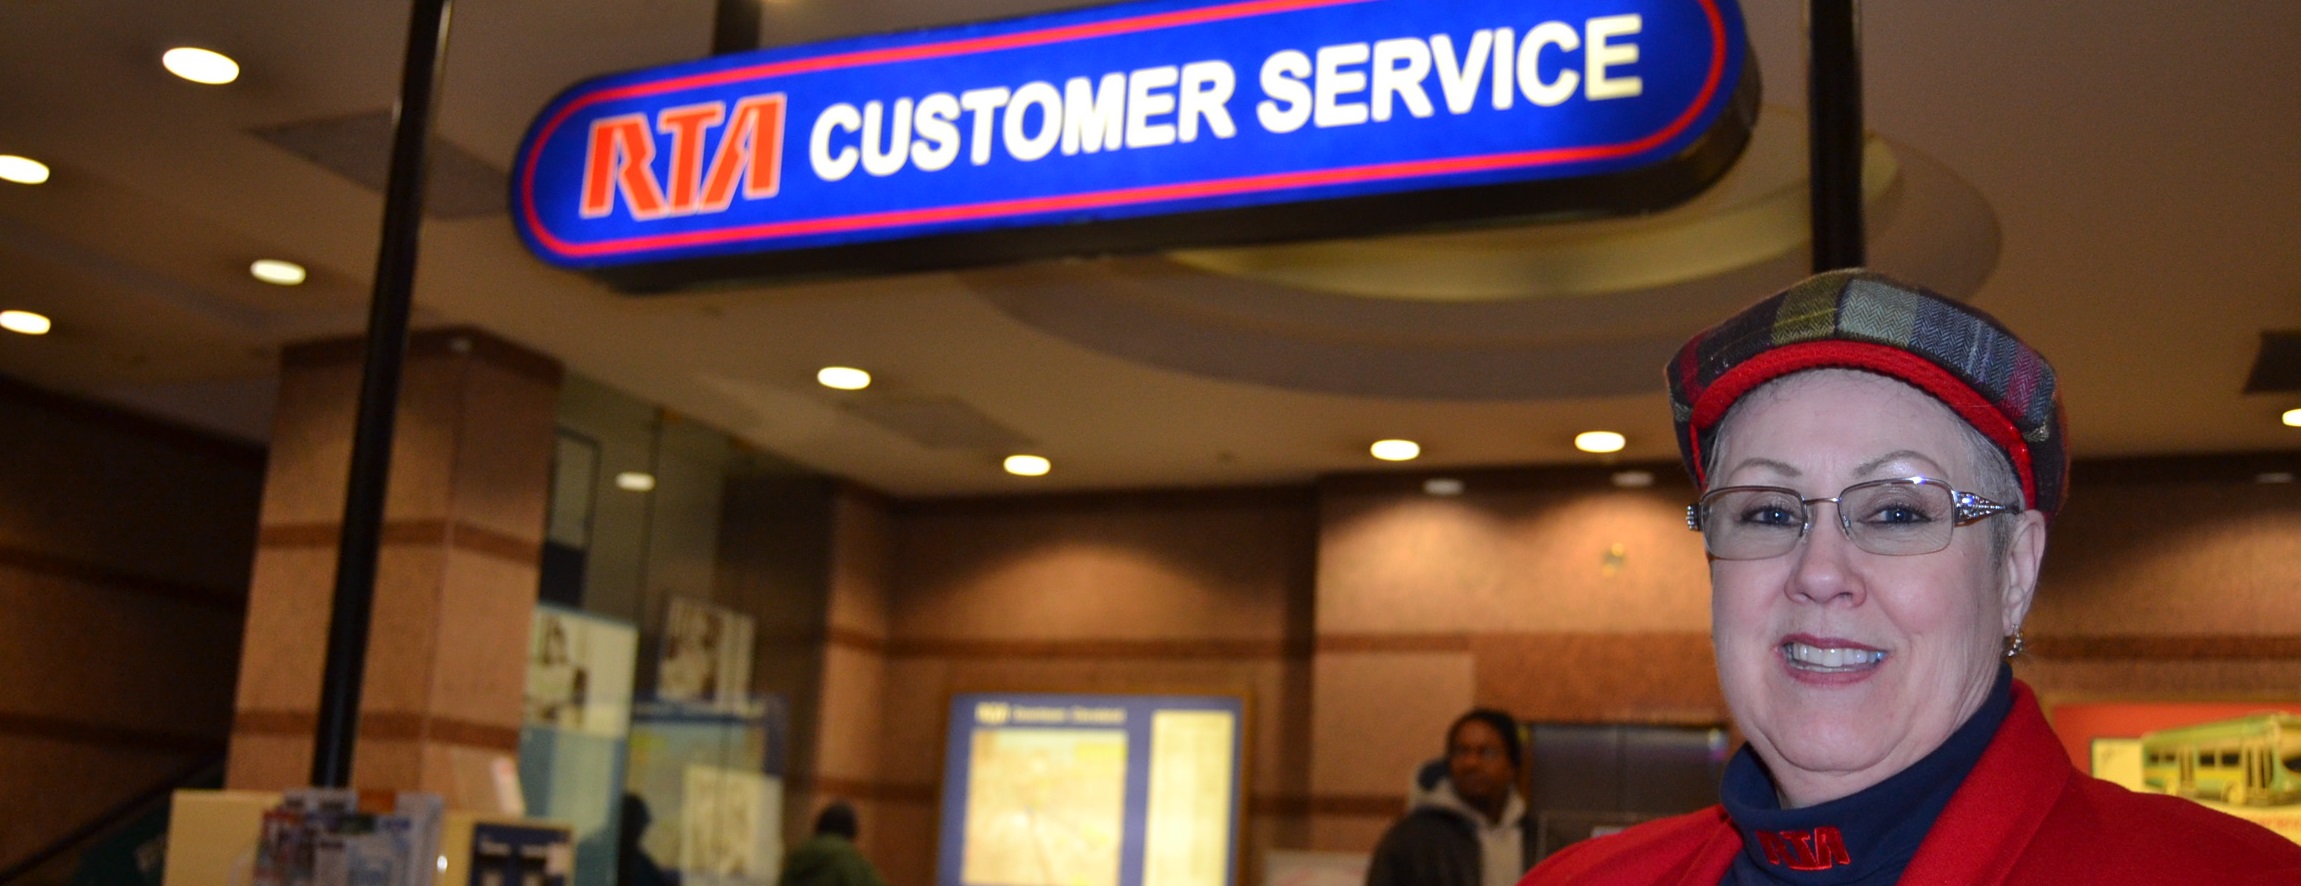  April 3: RTA salutes employees who provide great customer service